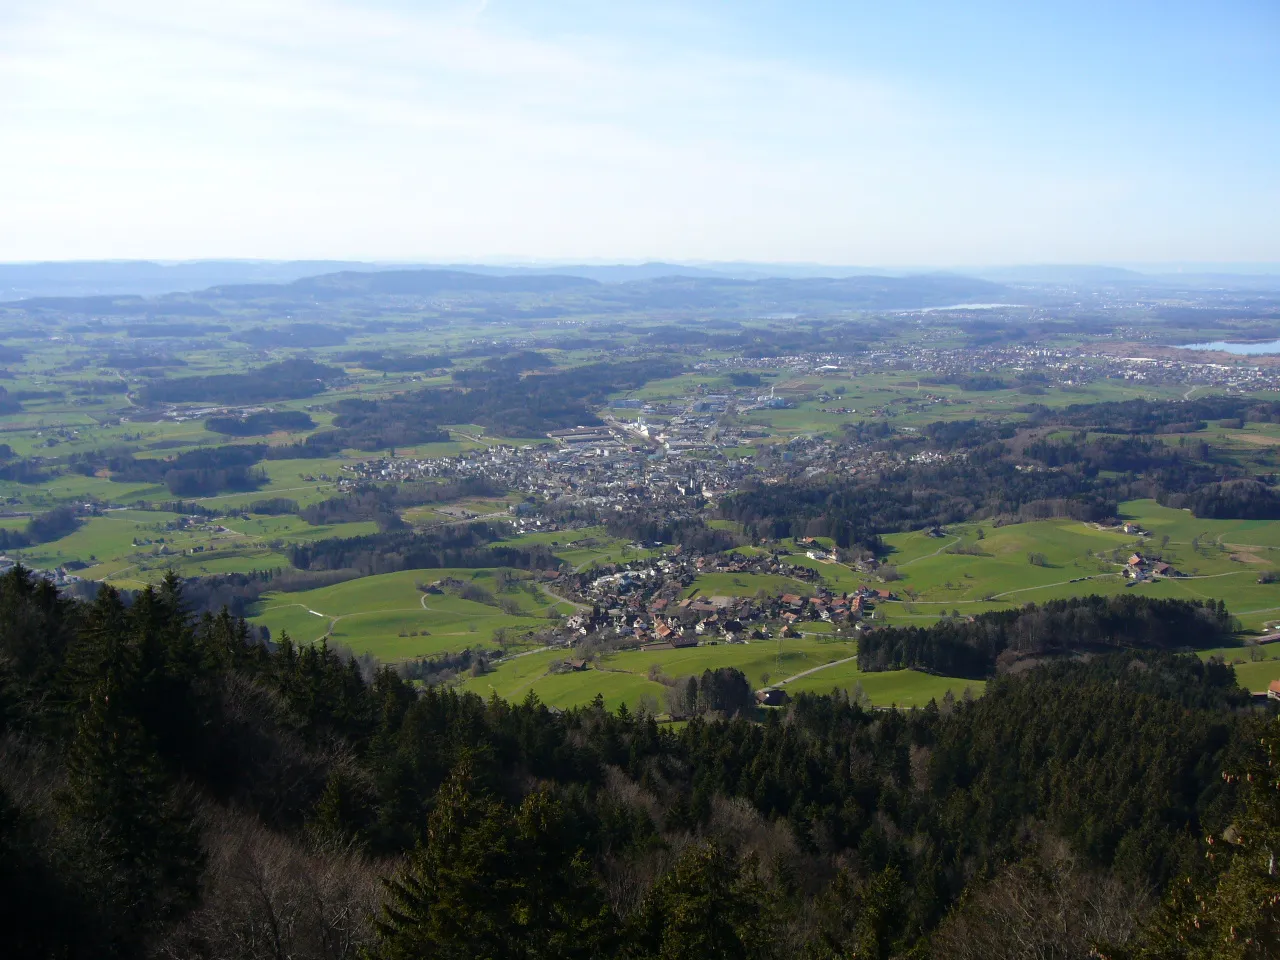 Photo showing: village of Hinwil canton of Zurich, Switzerland.
Picture taken from the top of the mountain Bachtel by Peter Berger. March 4, 2007.